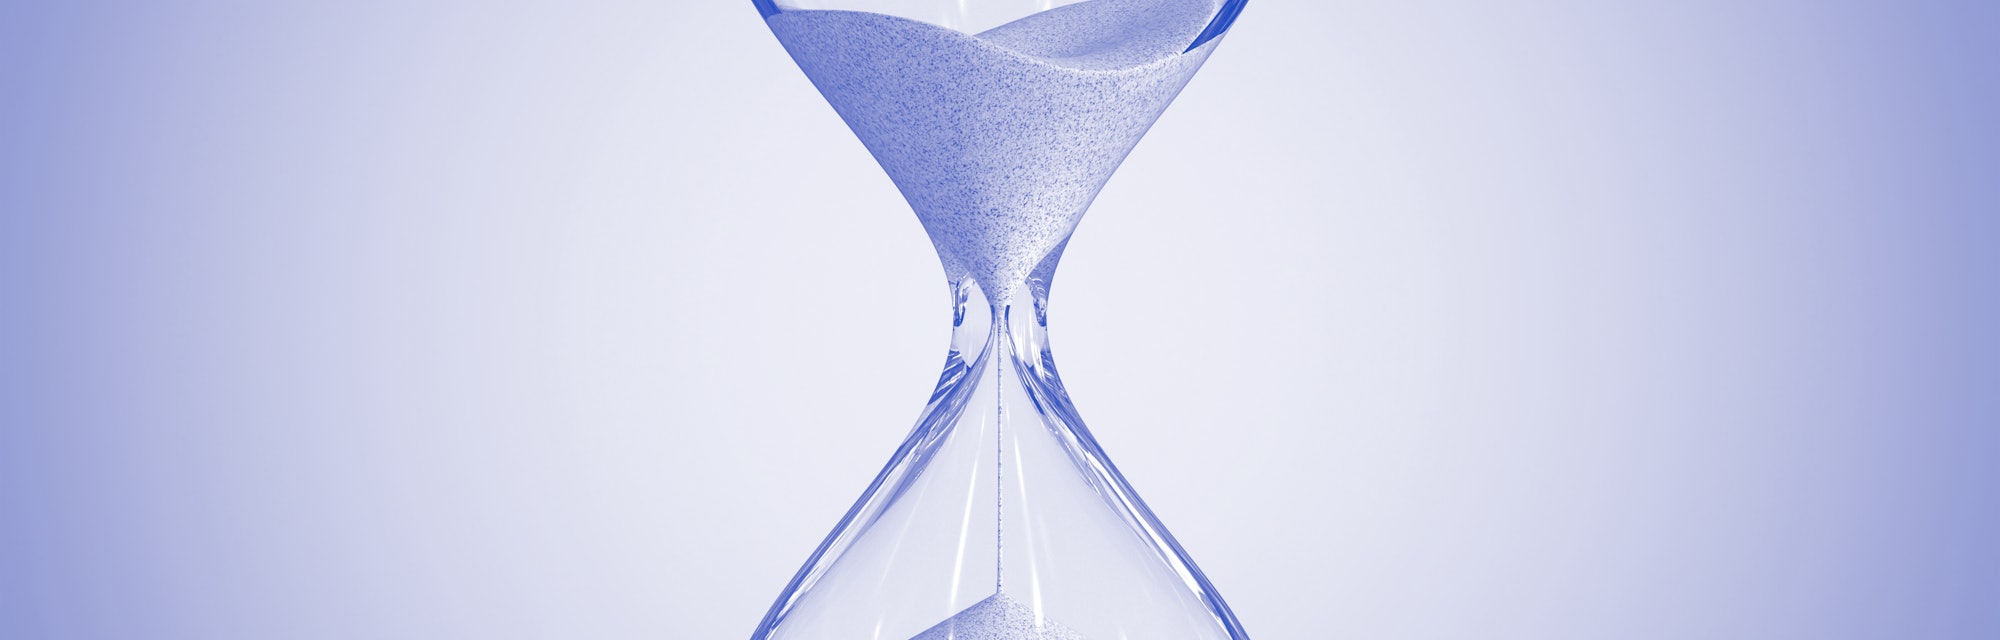 Hourglass on blue background, sandglass 3d rendering